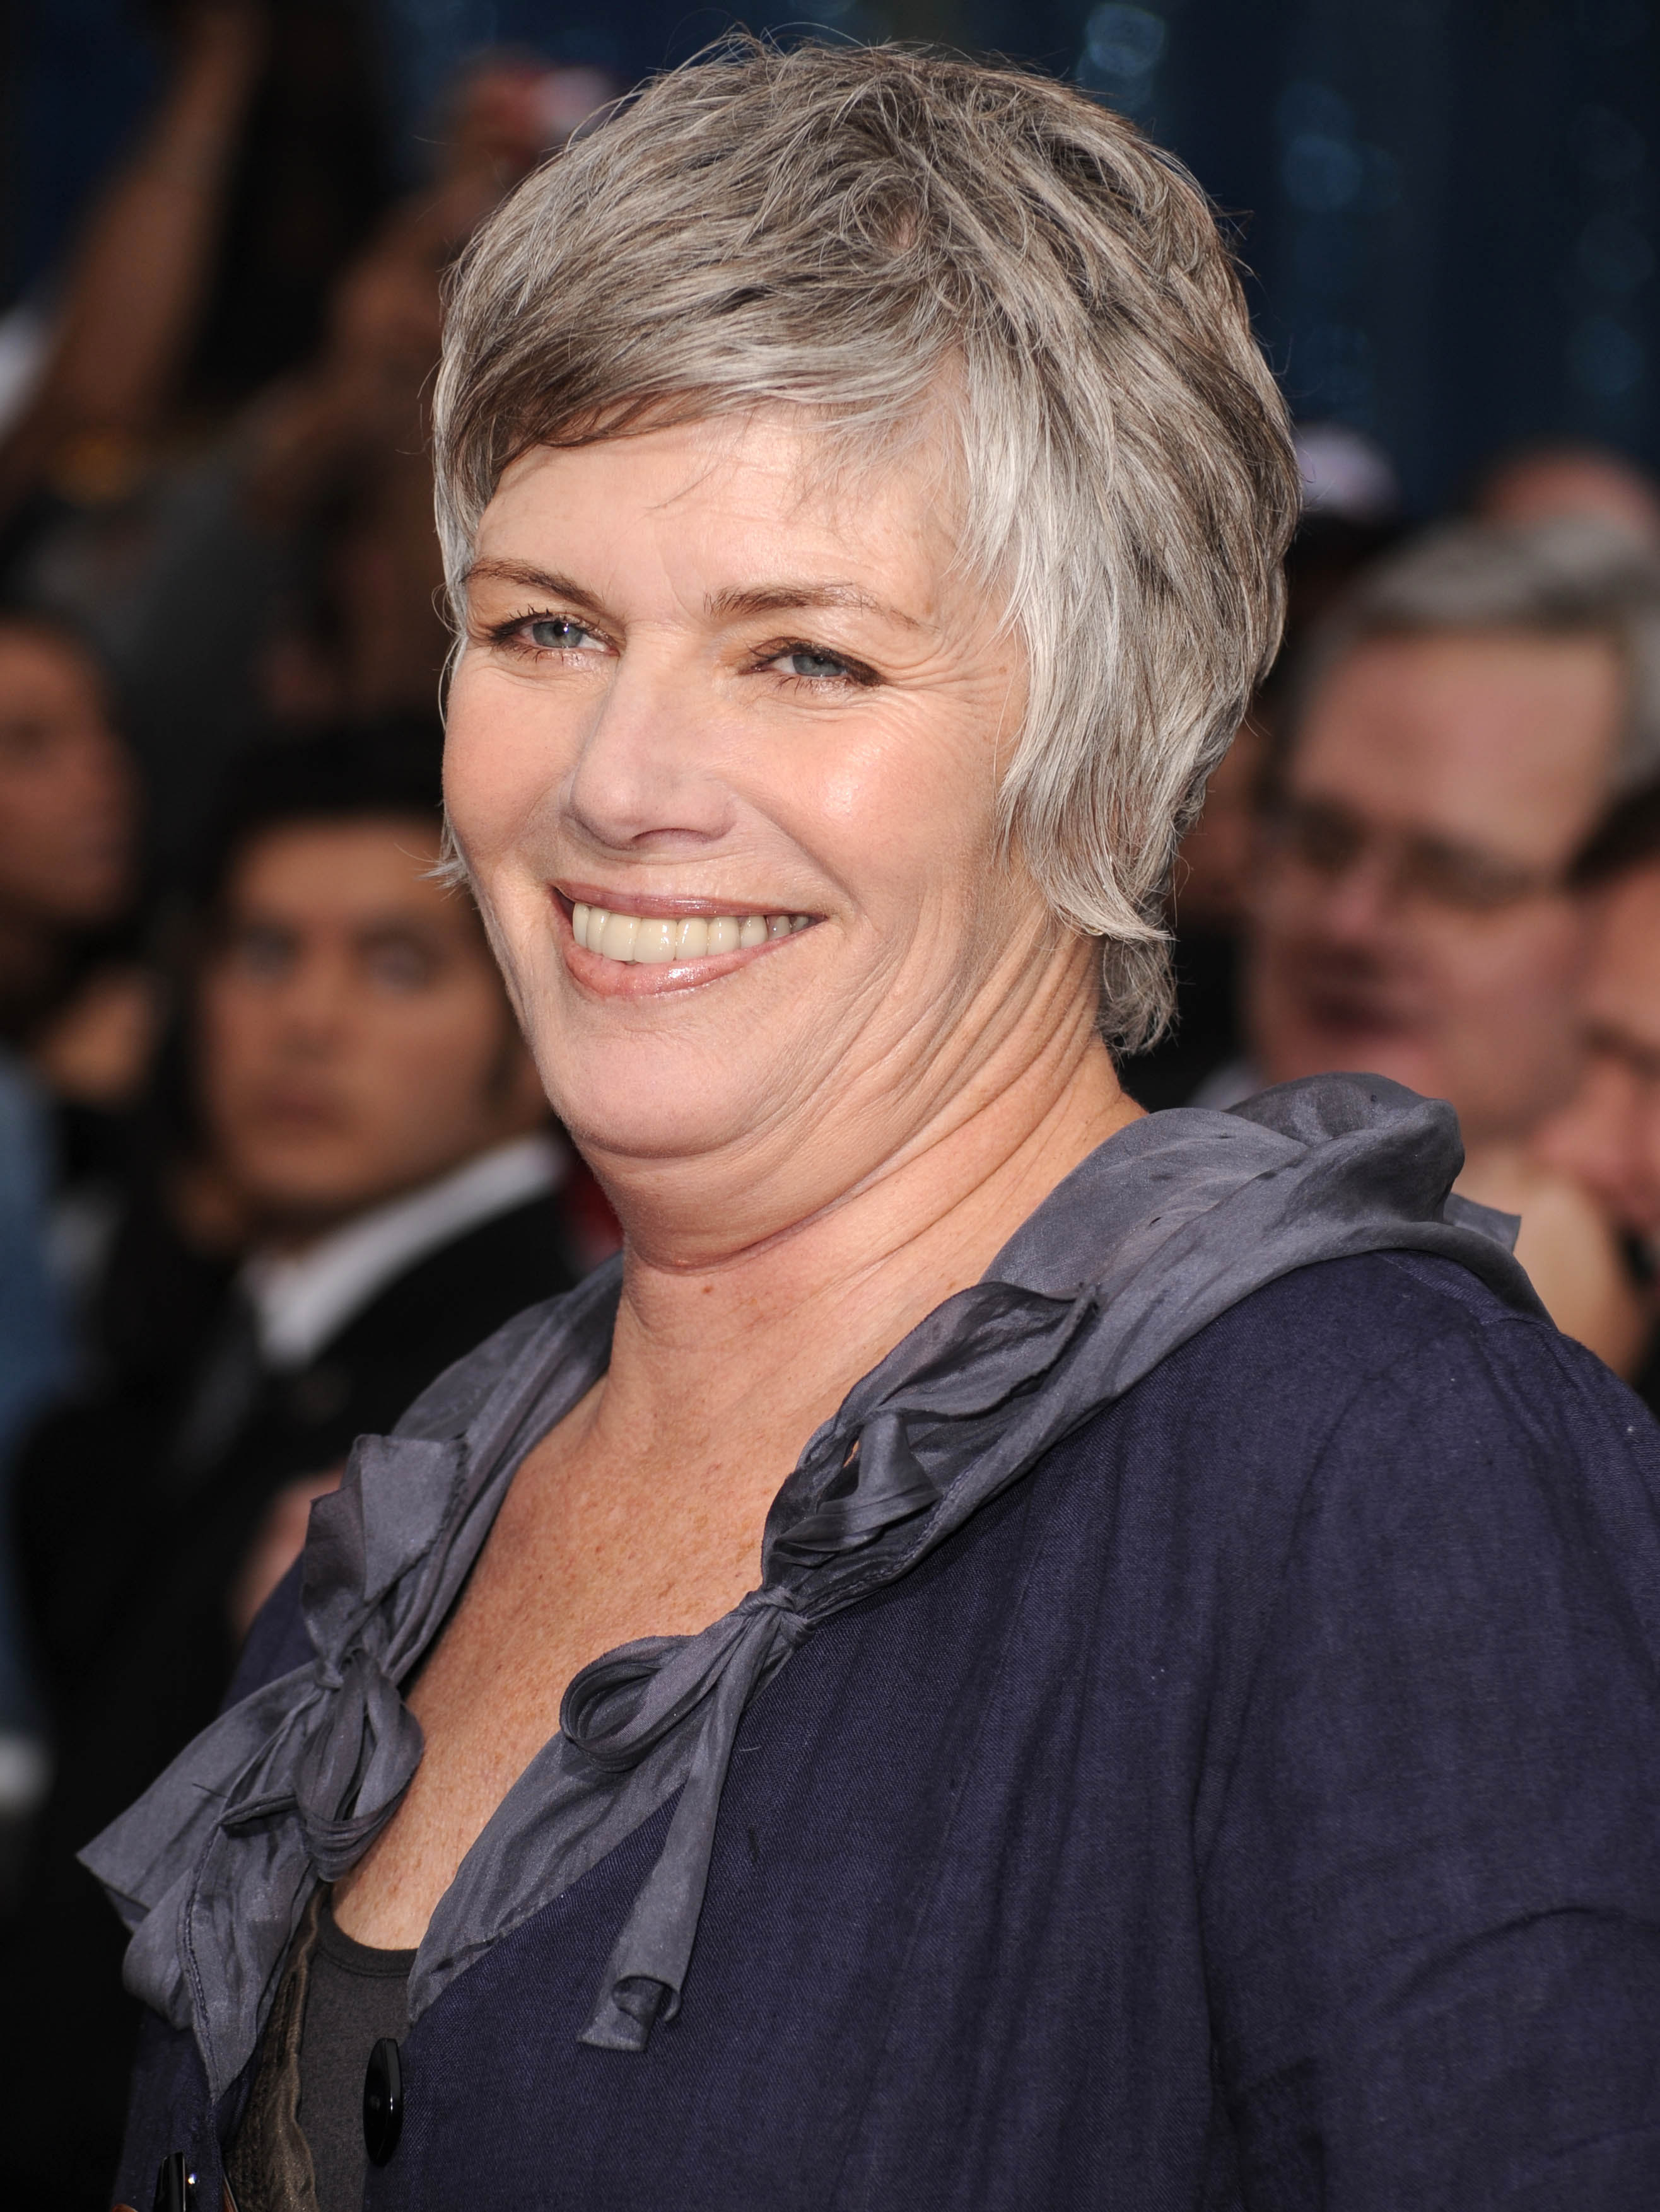 Kelly McGillis attends the "Prince of Persia: The Sands of Time" Los Angeles premiere on May 17, 2010 in Hollywood, California | Source: Getty Images